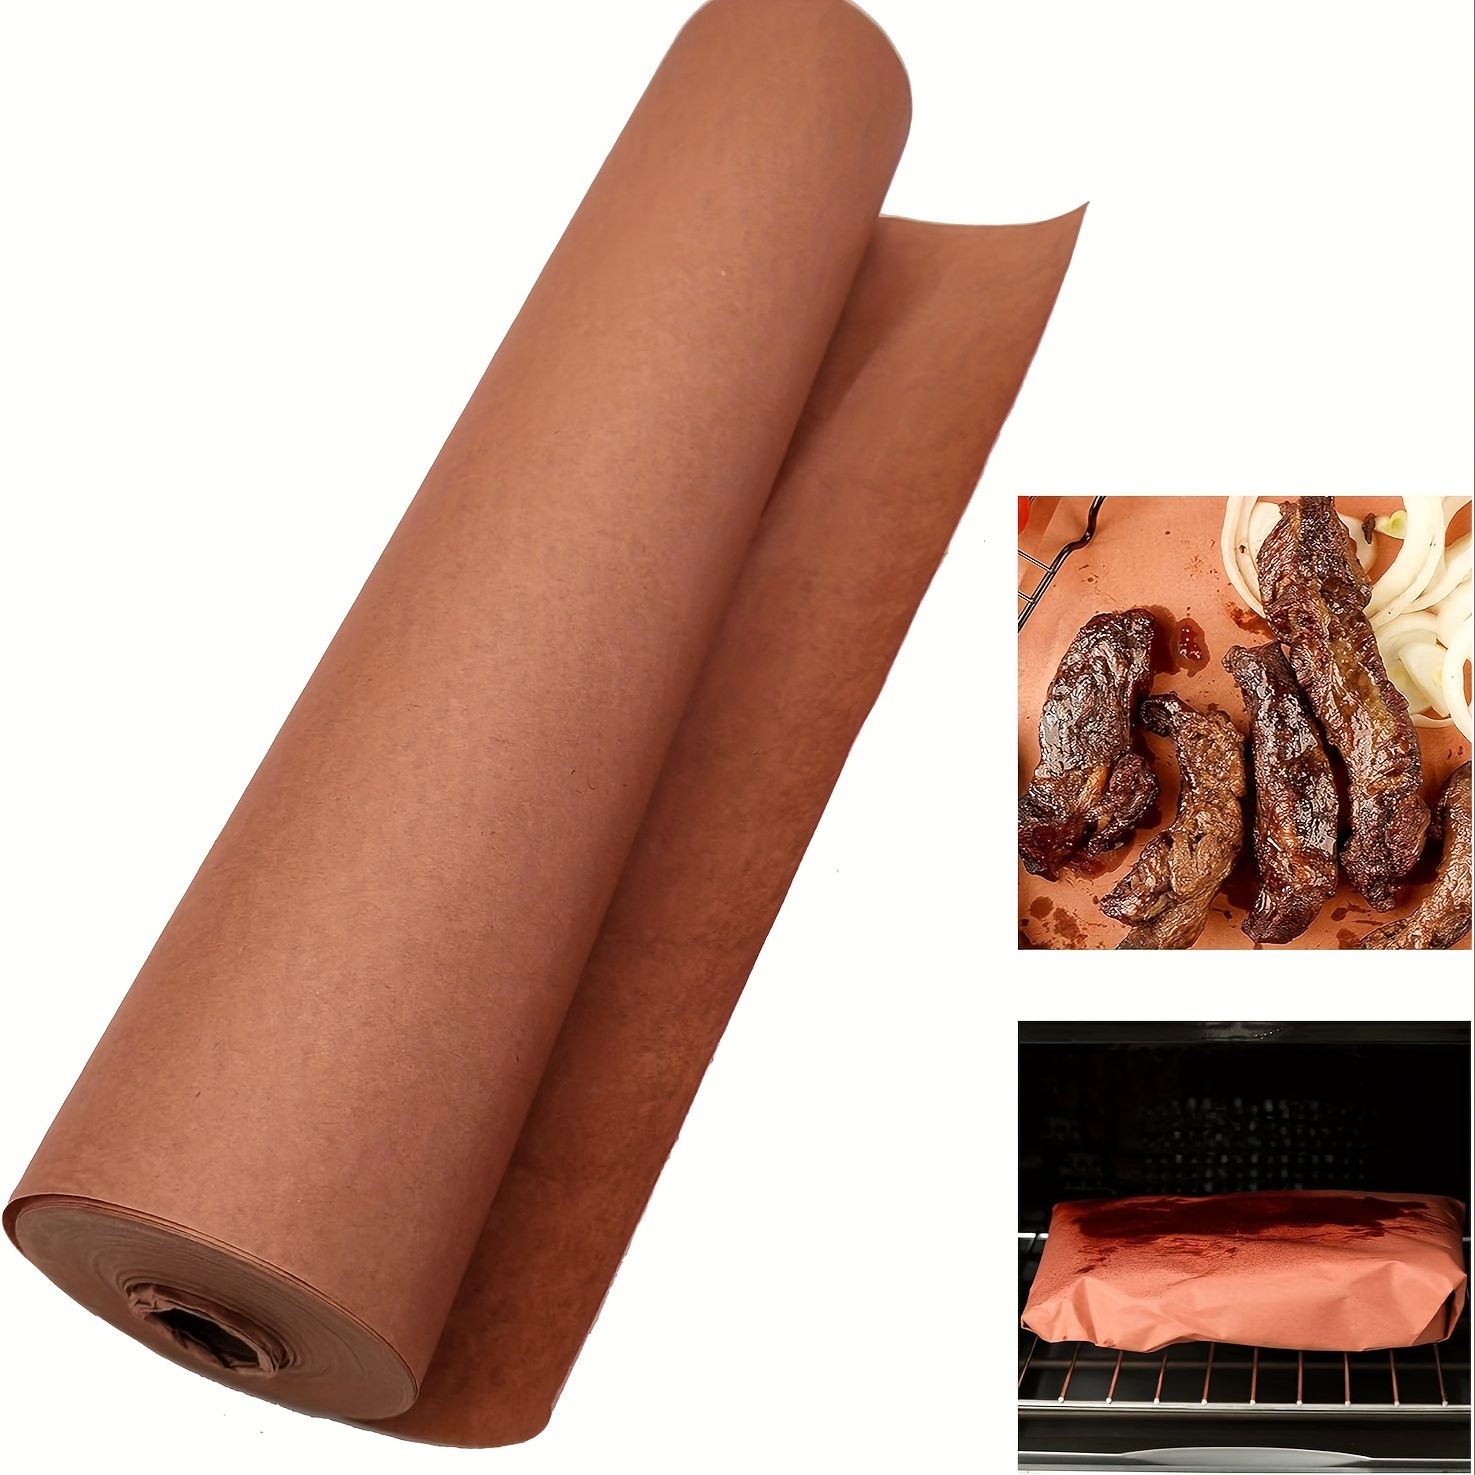 Bryco Goods White Kraft Butcher Paper Roll - 18 inch x 100 Foot White Paper Roll for Wrapping and Smoking Meat, BBQ Paper for The Perfect Brisket